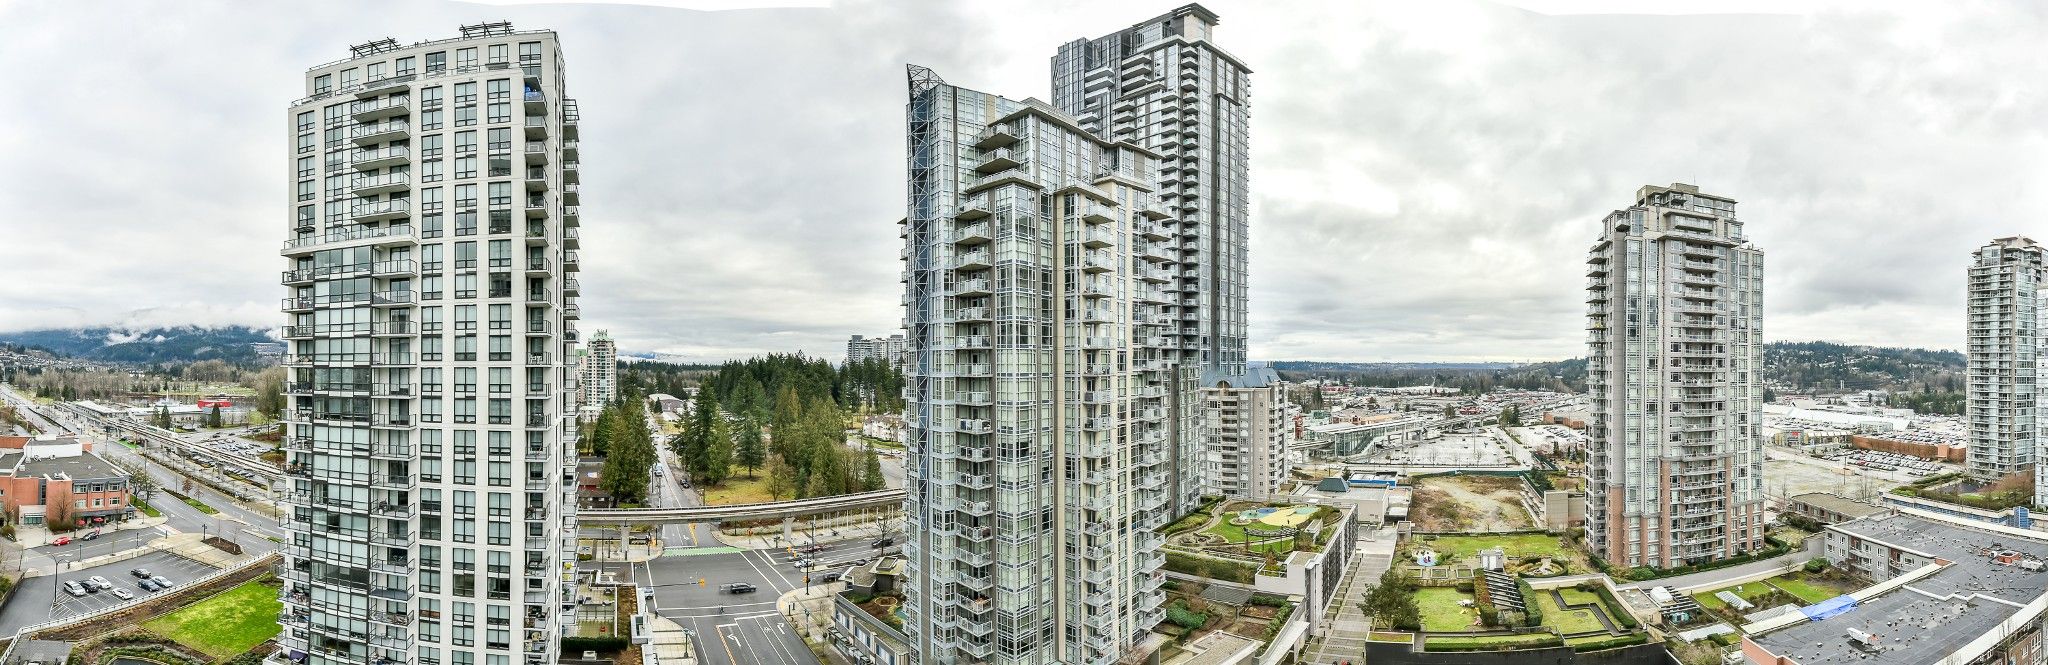 Main Photo: 2703 2979 GLEN DRIVE in Coquitlam: North Coquitlam Condo for lease